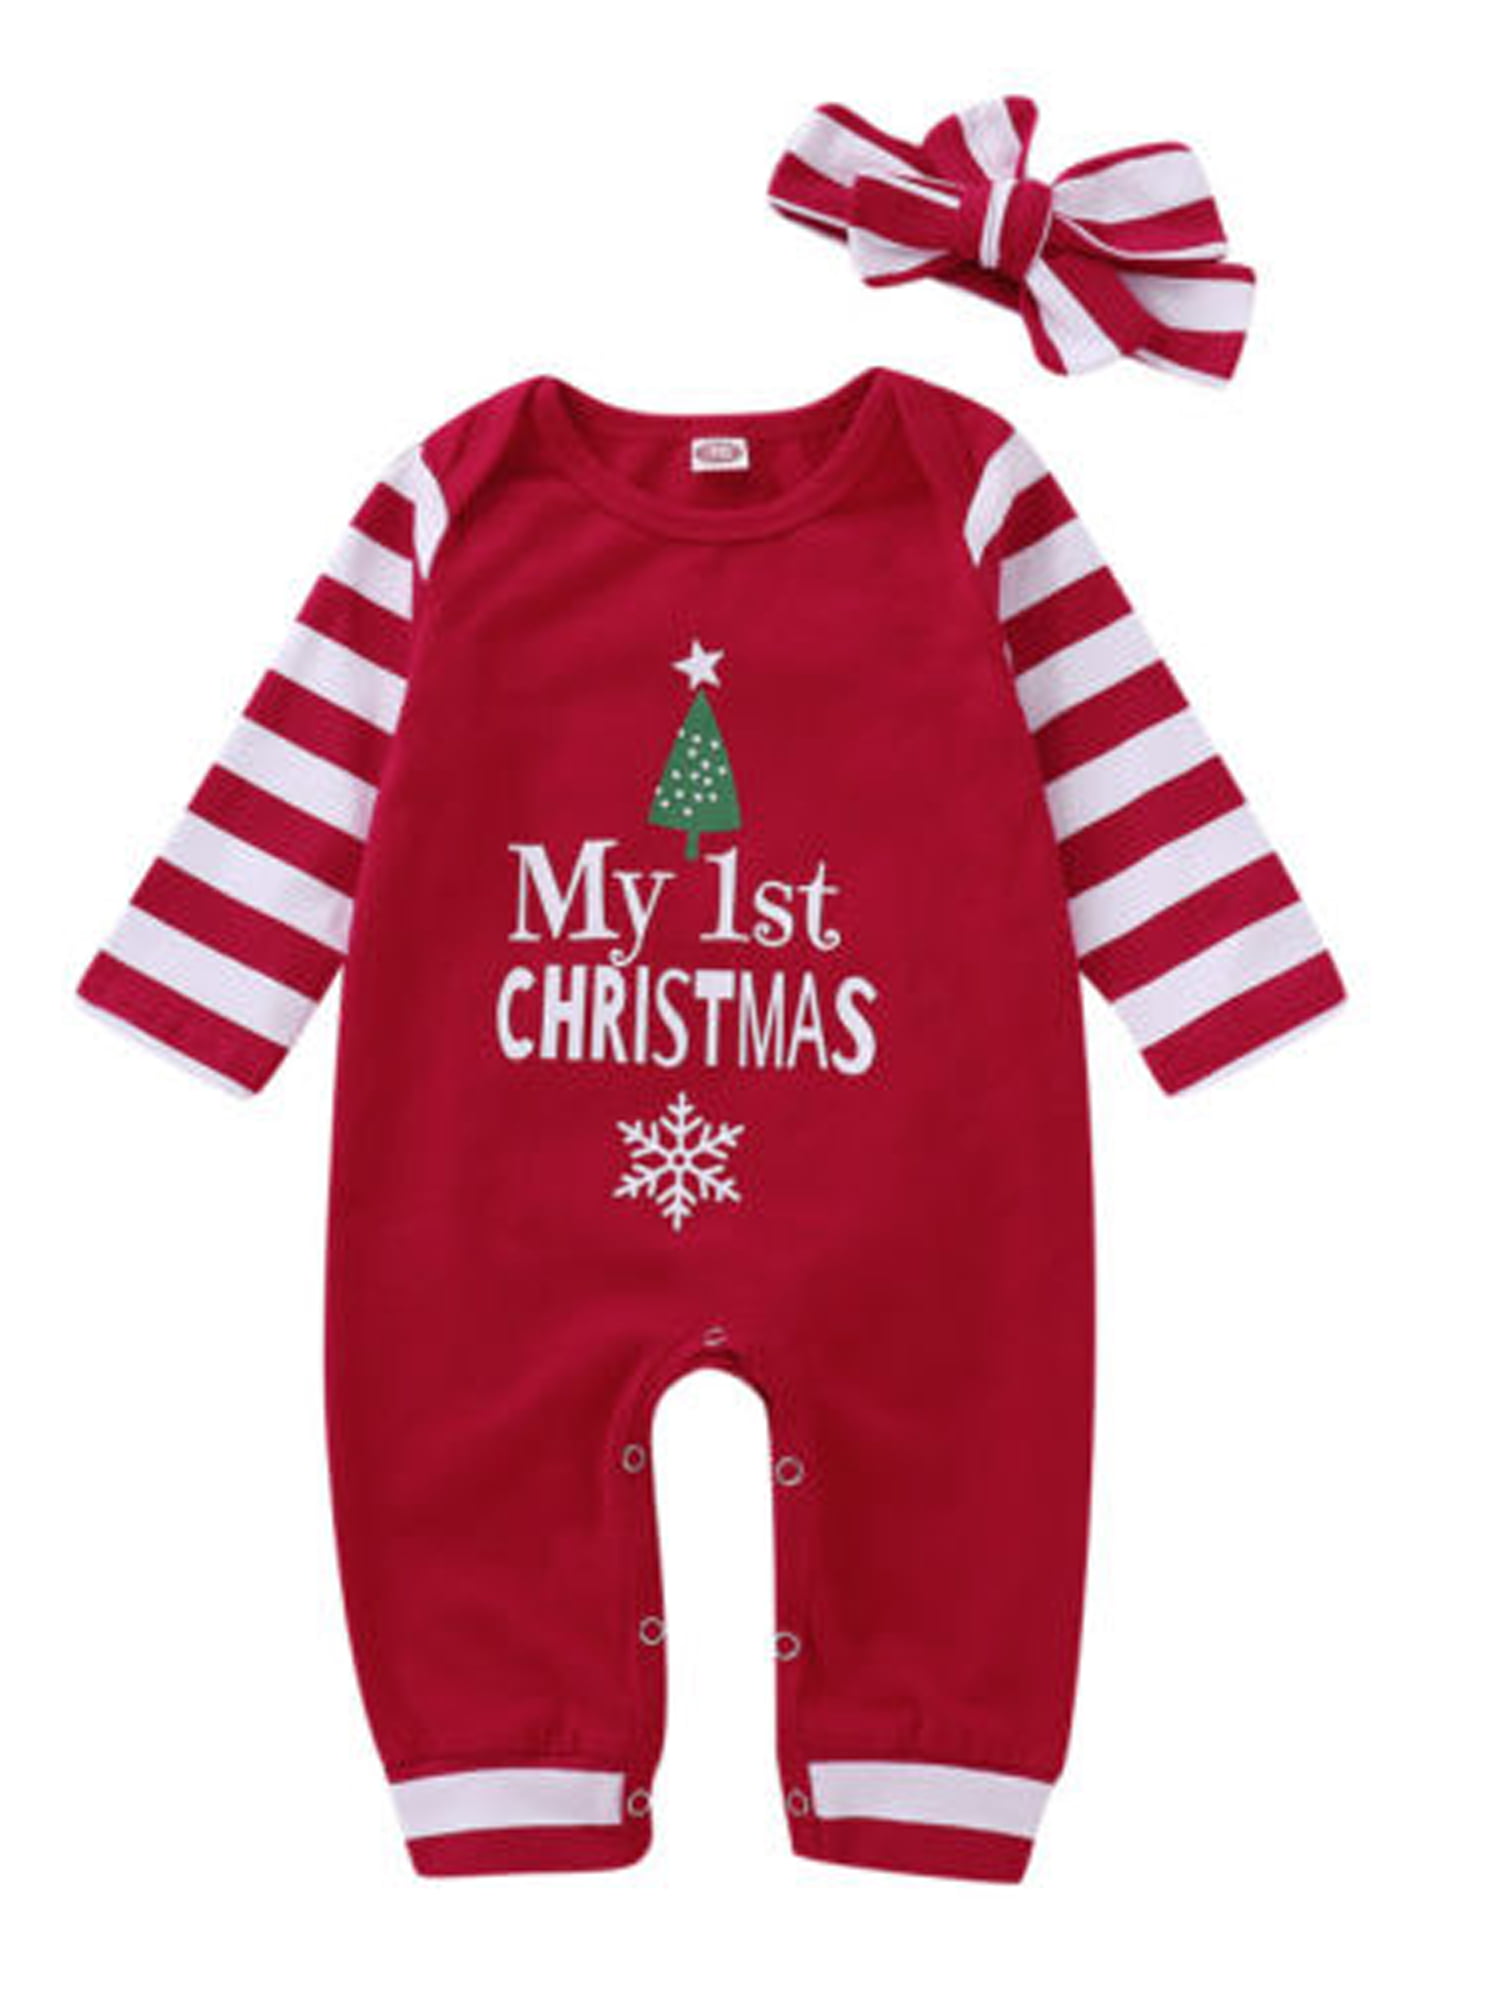 My 1st Christmas Outfit Toddler Infant Baby Striped Long Sleeve Romper Jumpsuit Xmas Footless Bodysuit 